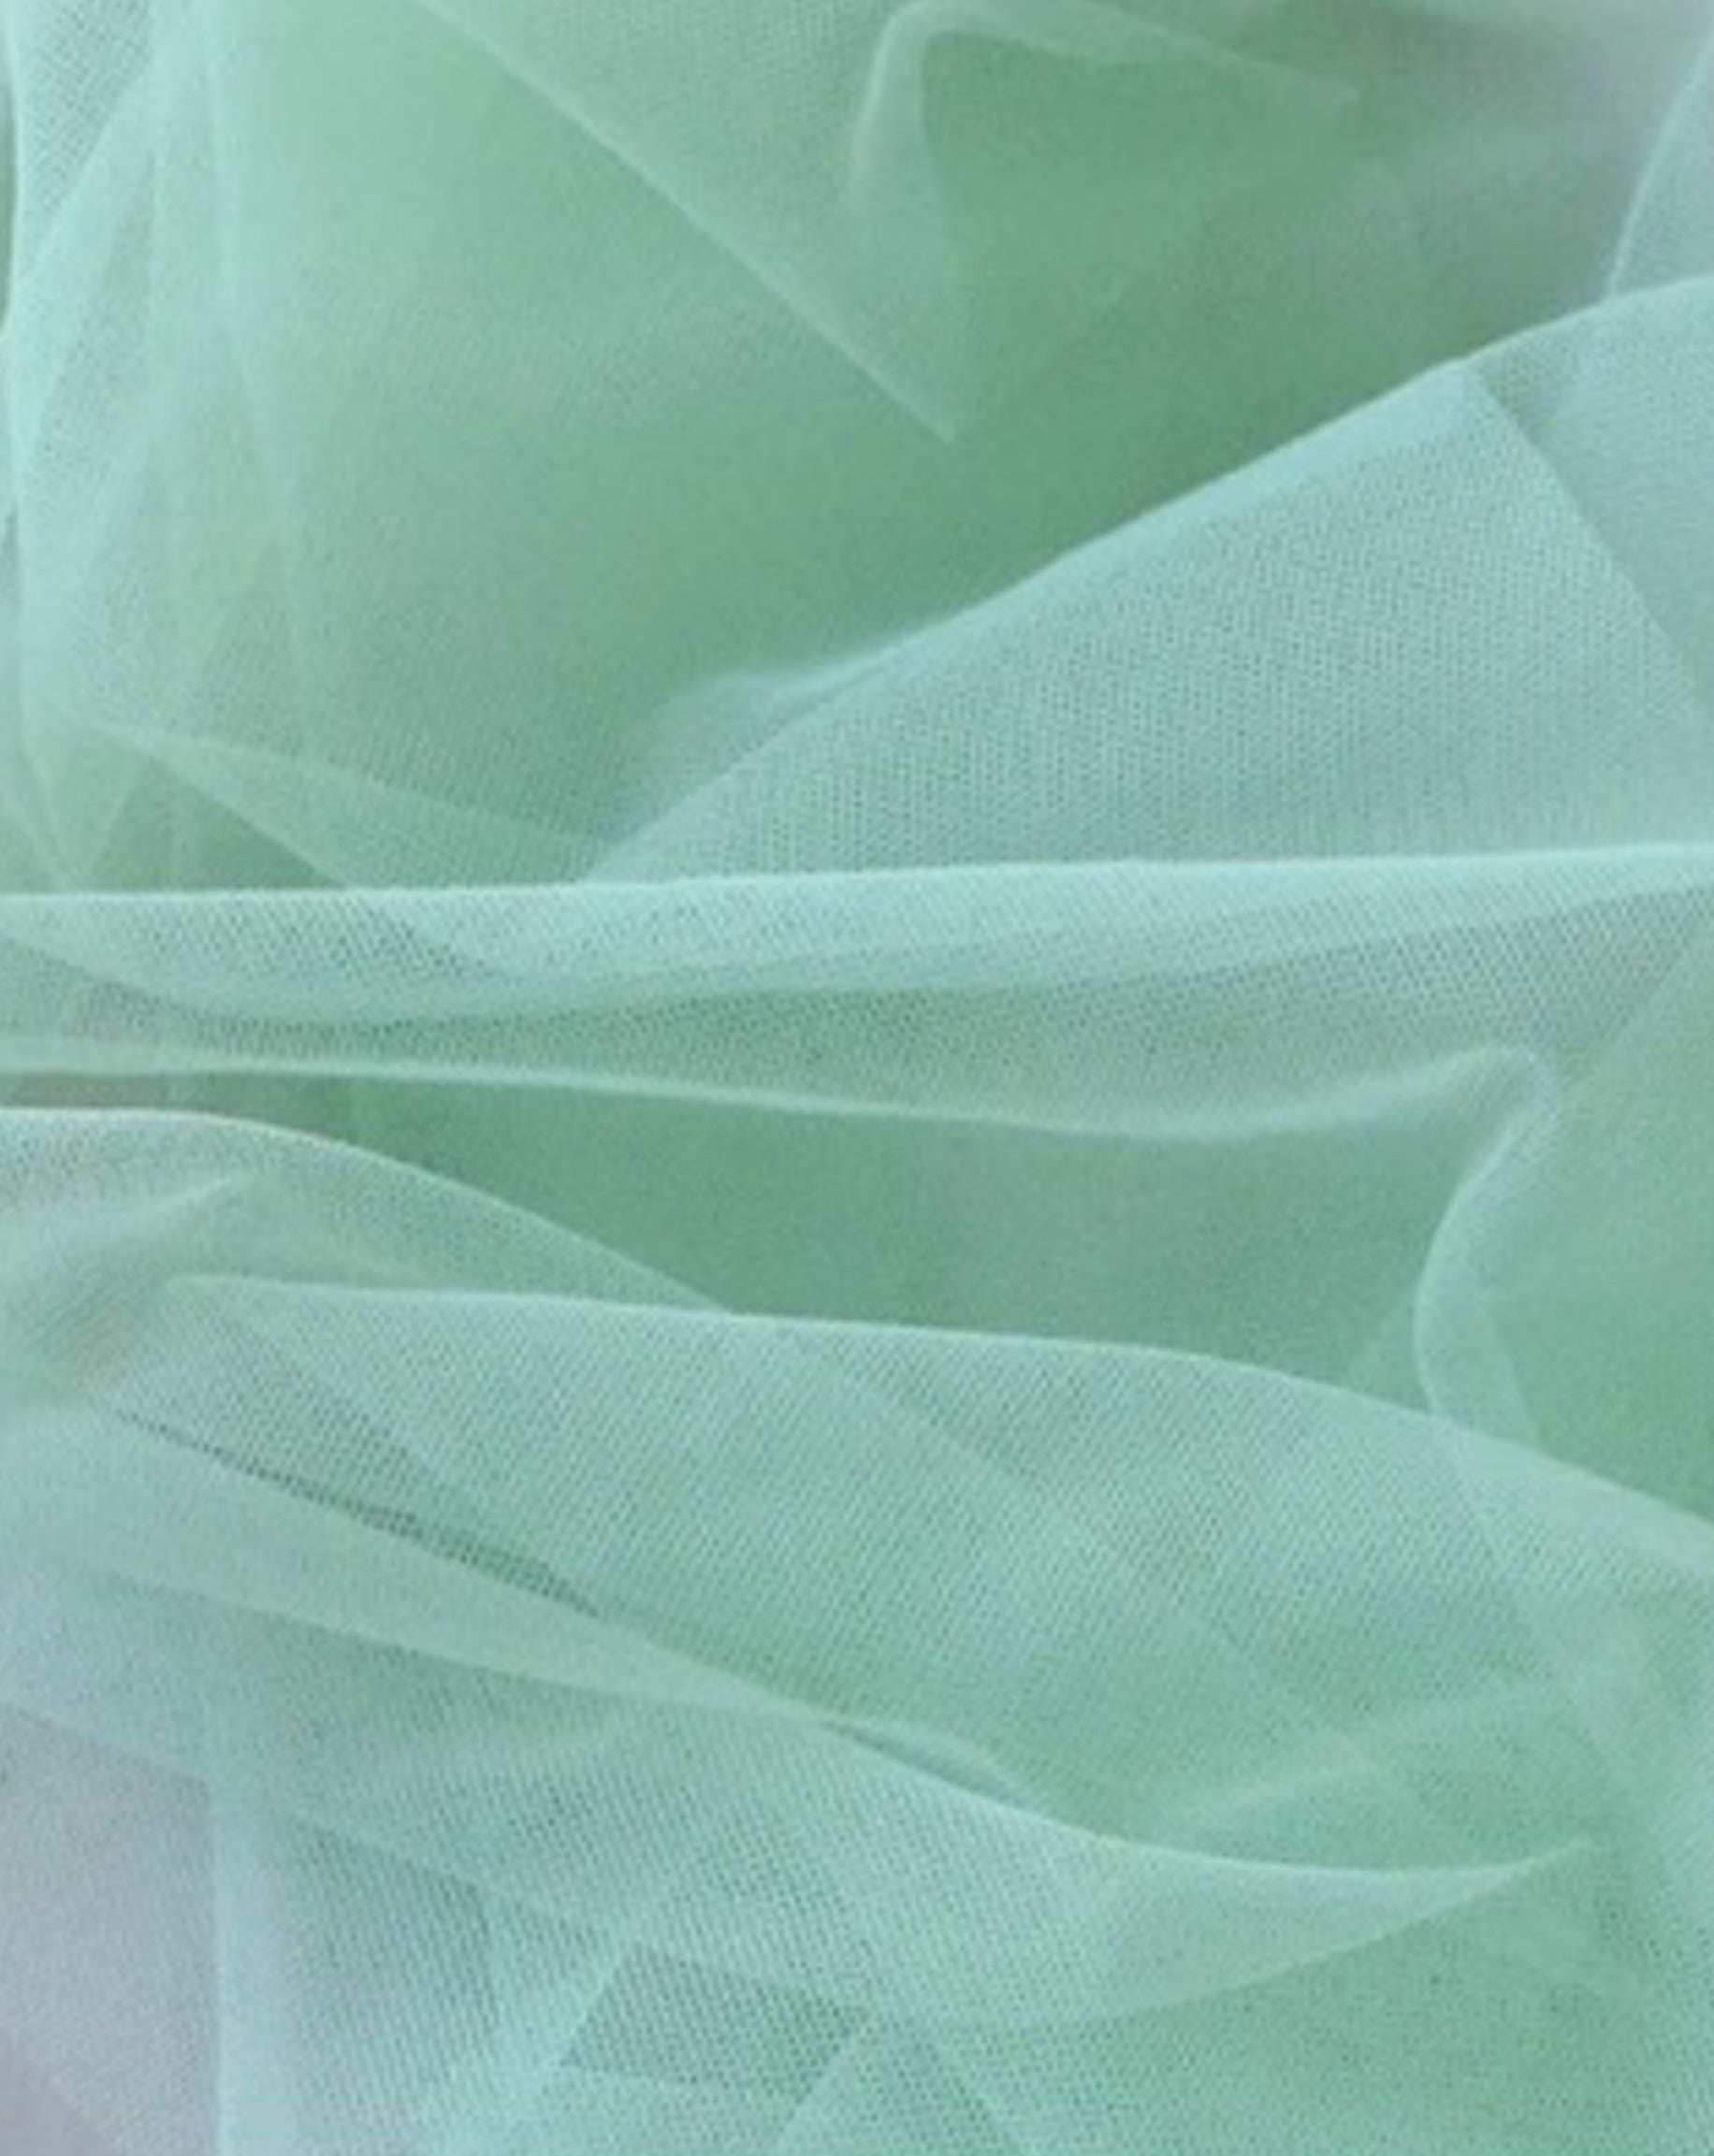 Close up of Rubies Bras mint tulle fabric.